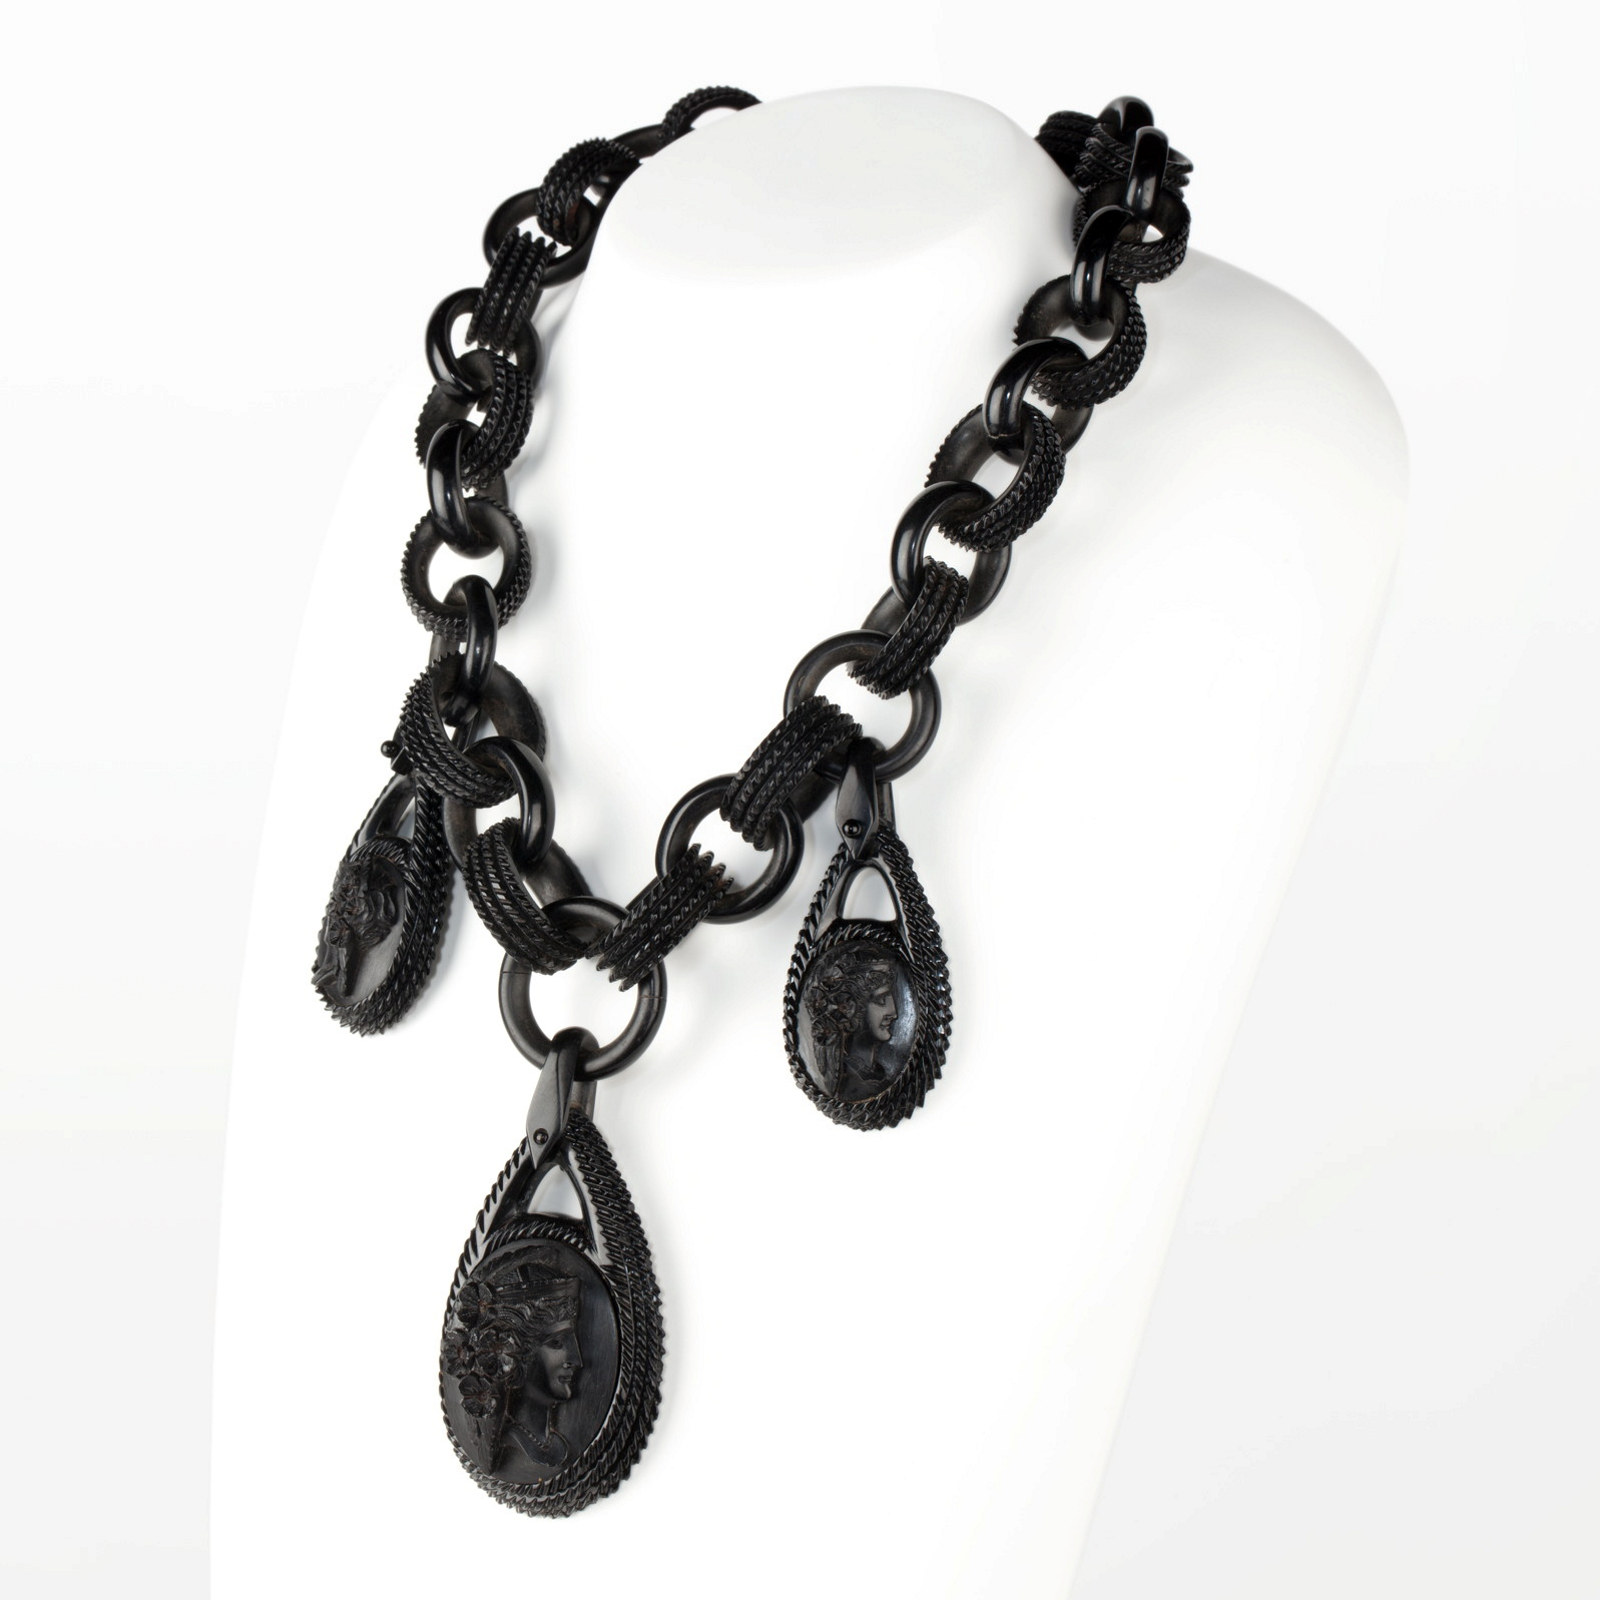 A vulcanite necklace composed of 32 graduating oval links and three oval pendants.